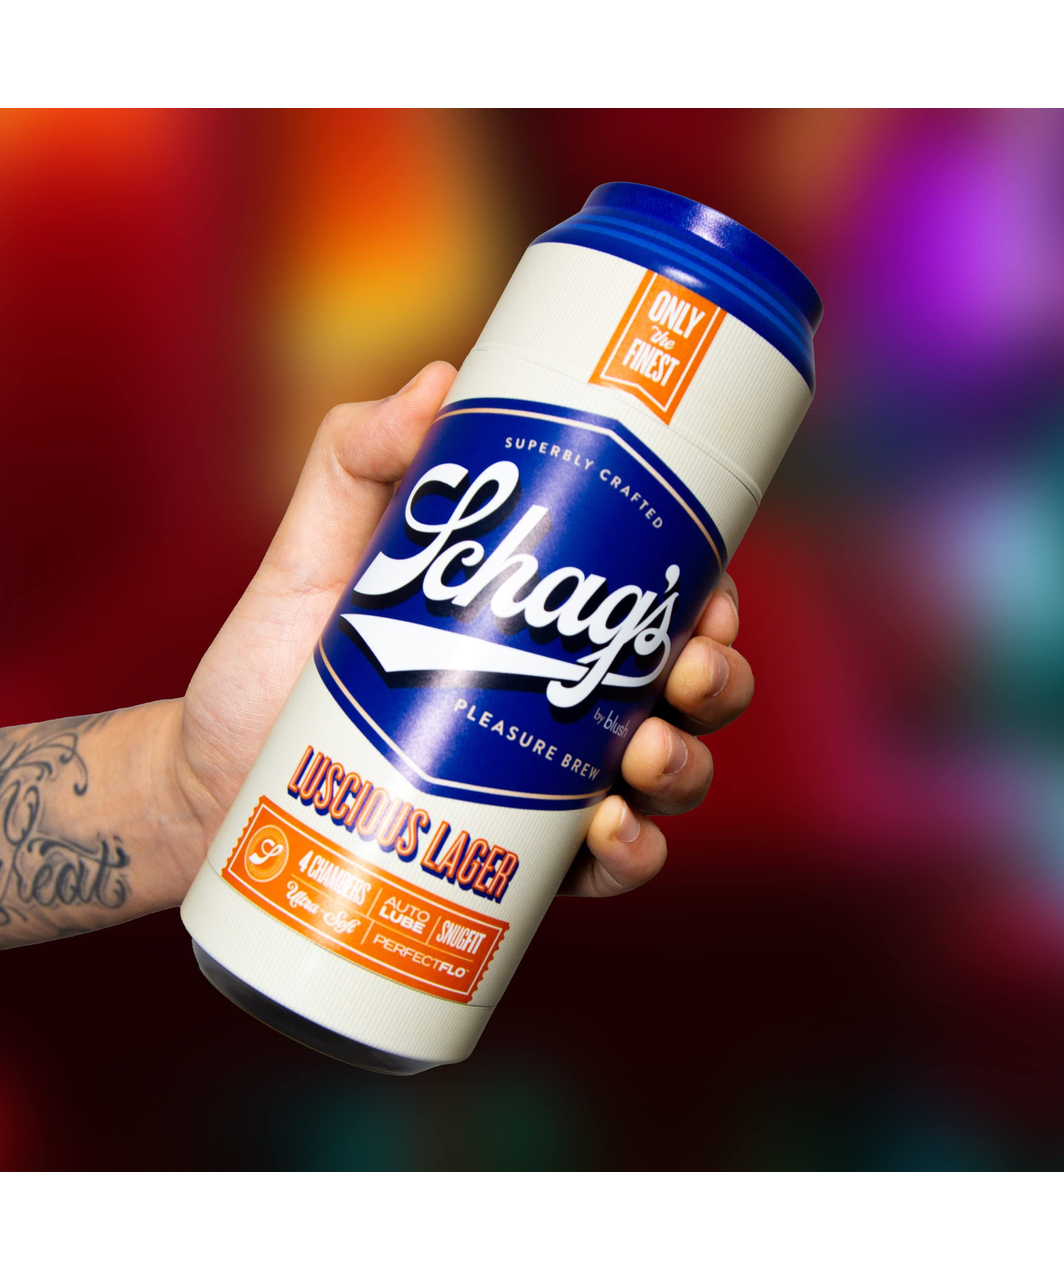 Schag's Luscious Lager мастурбатор